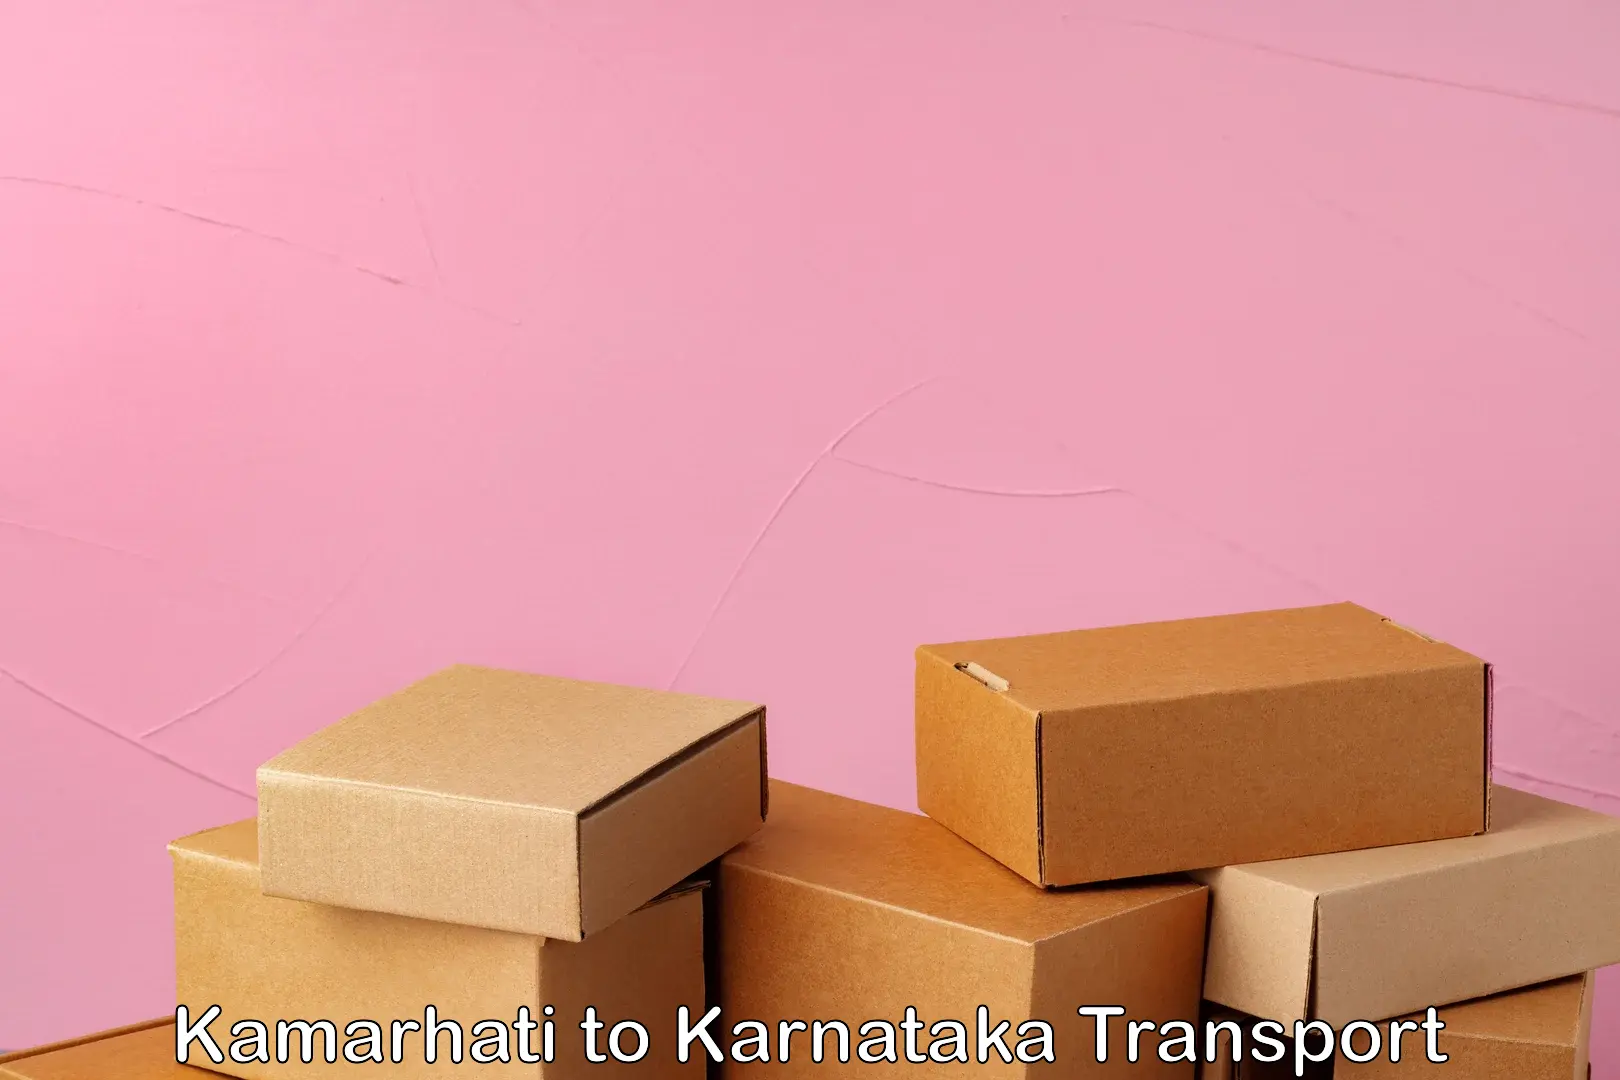 Air freight transport services Kamarhati to Manipal Academy of Higher Education